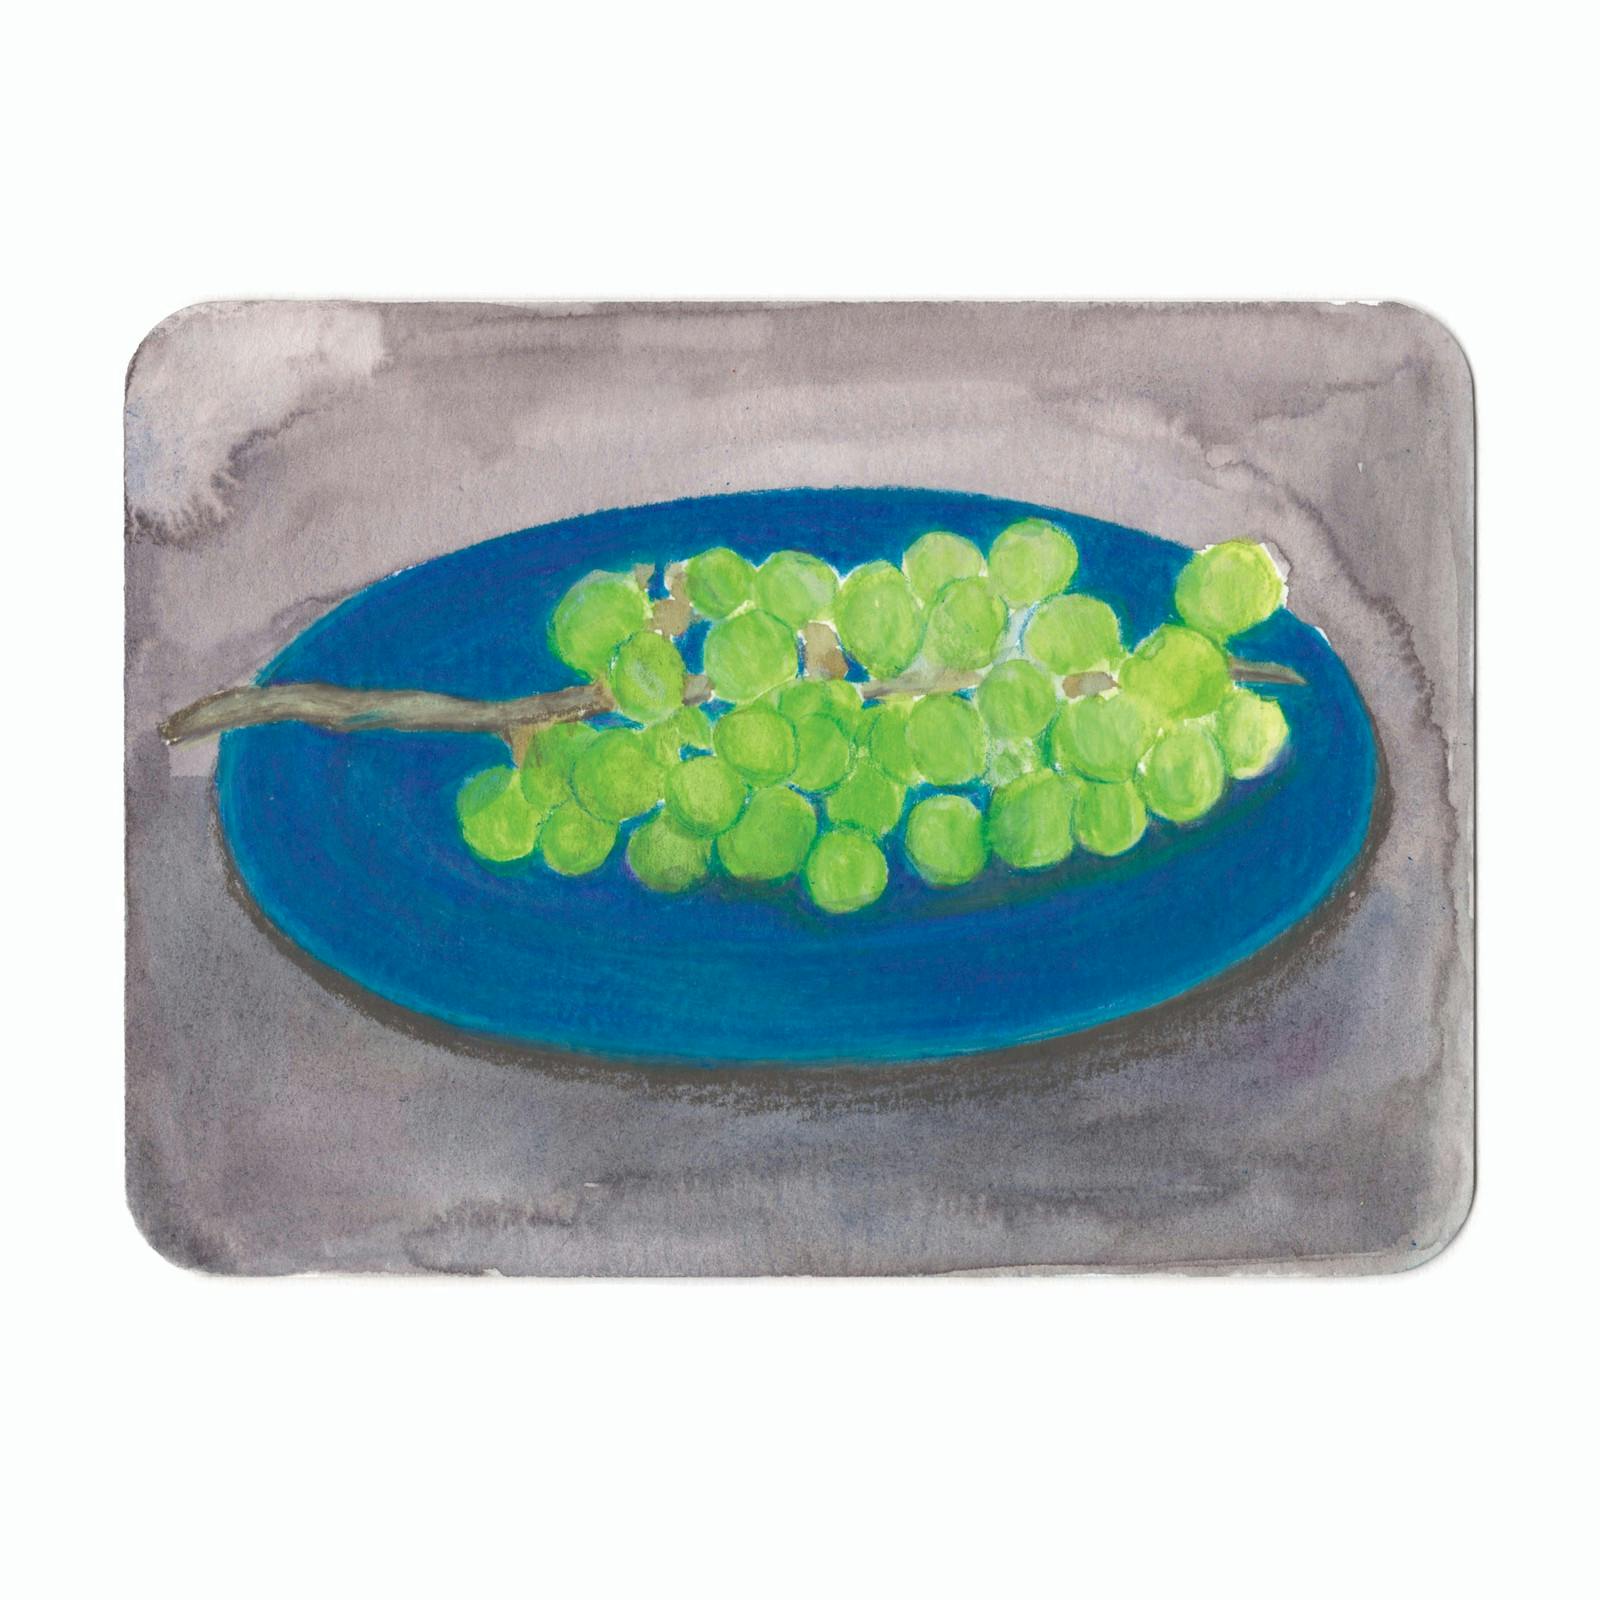 STILL LIFE WITH GREEN GRAPES